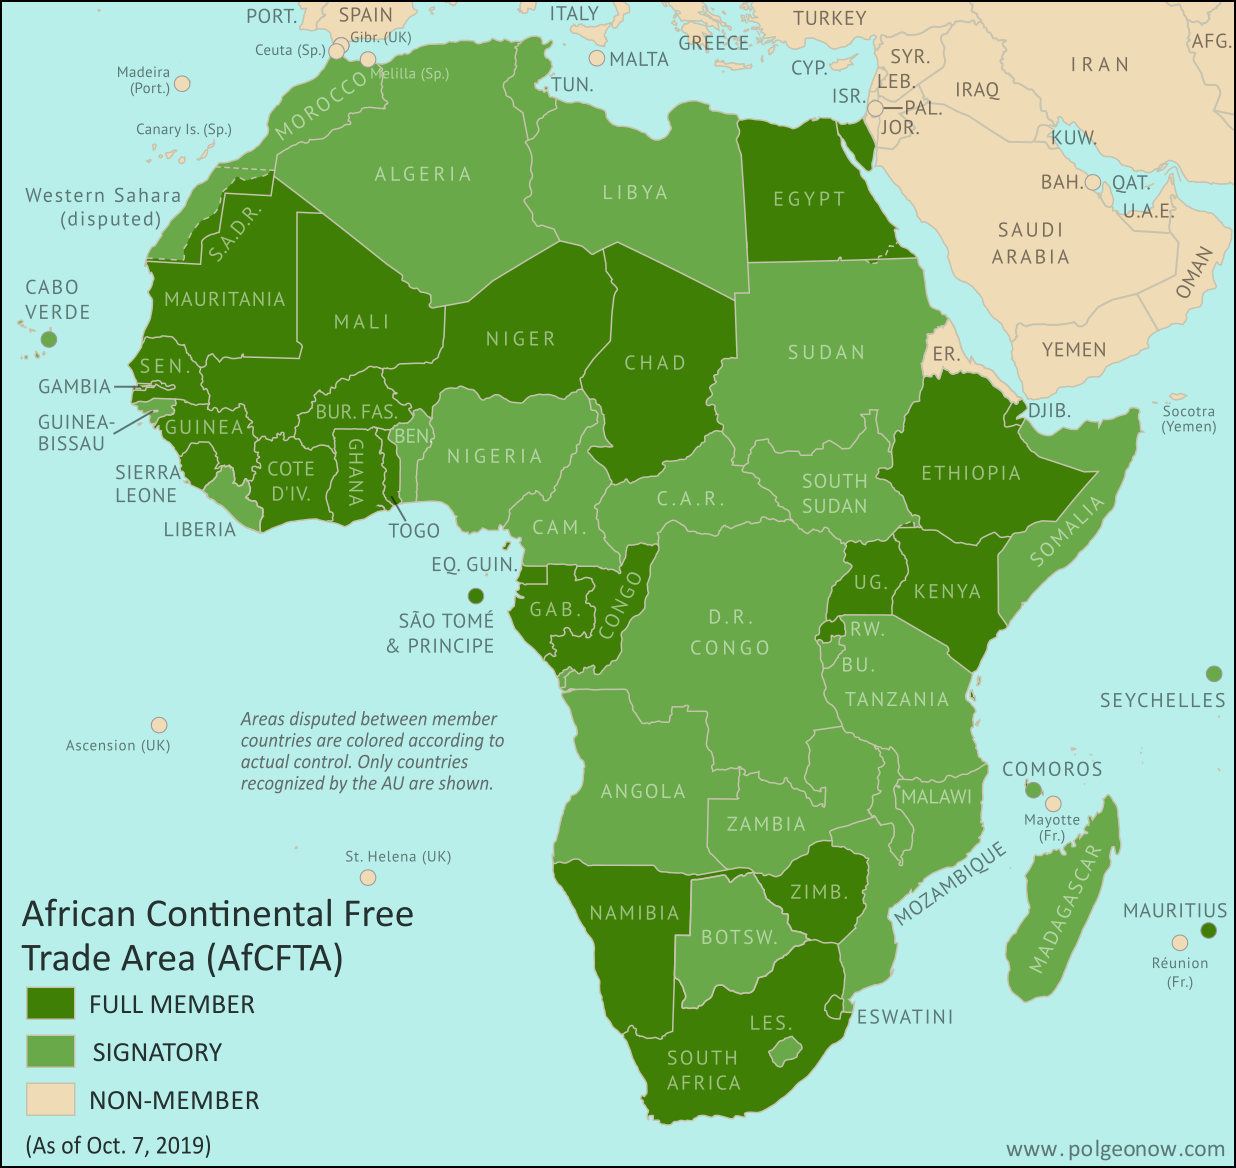 African Continental Free Trade Area countries: Map of AfCFTA members and signatories as of October 2019. Who has signed the AfCFTA, who has ratified the AfCFTA, and who has not signed. Updated for 28th ratification by Mauritius. Colorblind accessible.